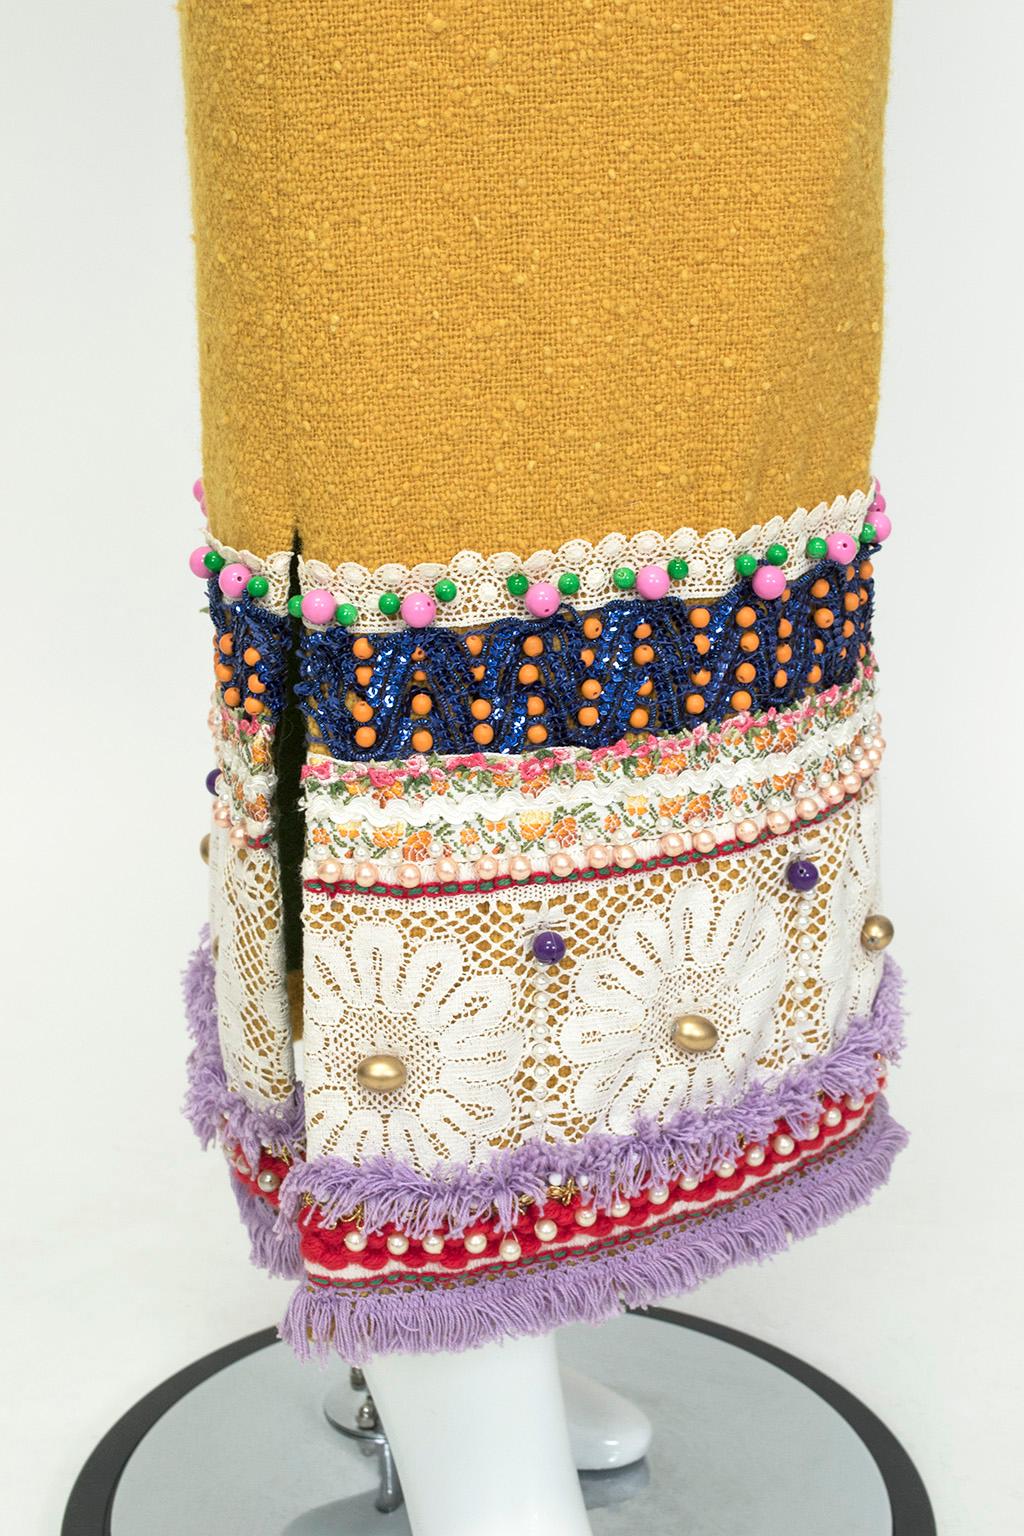 Digby Morton Mustard Wool Bouclé Maximalist Appliqué Novelty Skirt - M, 1960s In Excellent Condition For Sale In Tucson, AZ